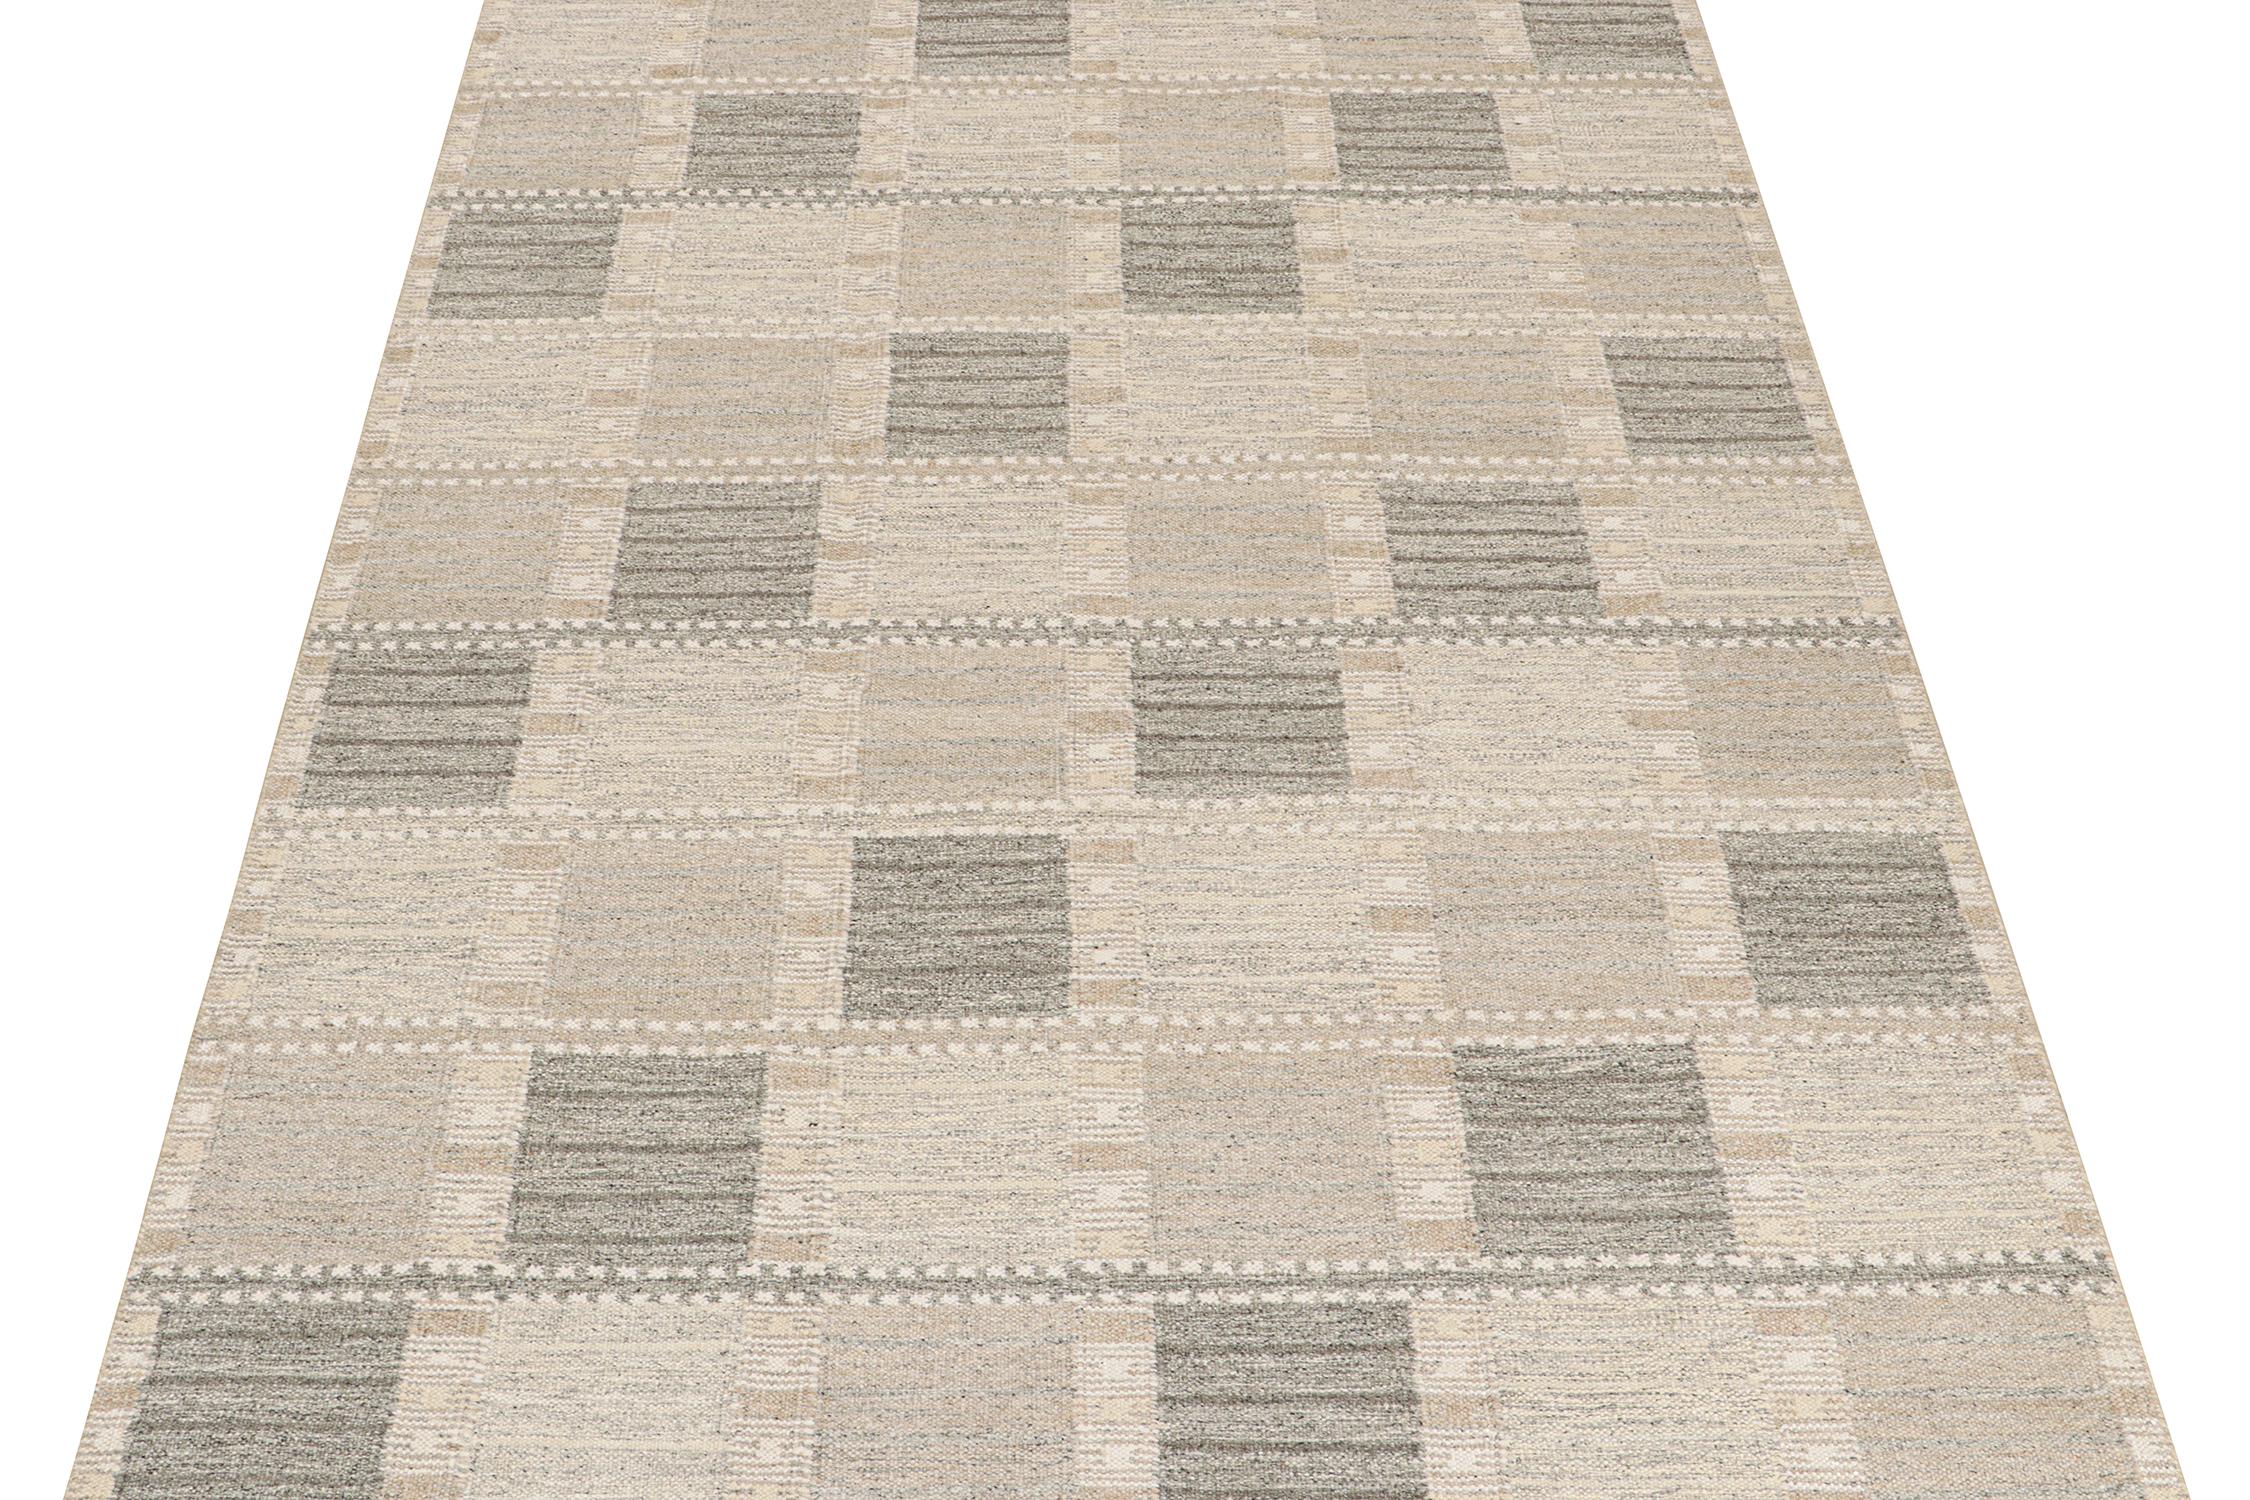 This 9x12 flat weave is a new addition to the Scandinavian Kilim collection by Rug & Kilim. Handwoven in wool and natural yarns, its design reflects a contemporary take on mid-century Rollakans and Swedish Deco style.

On the Design:

This new